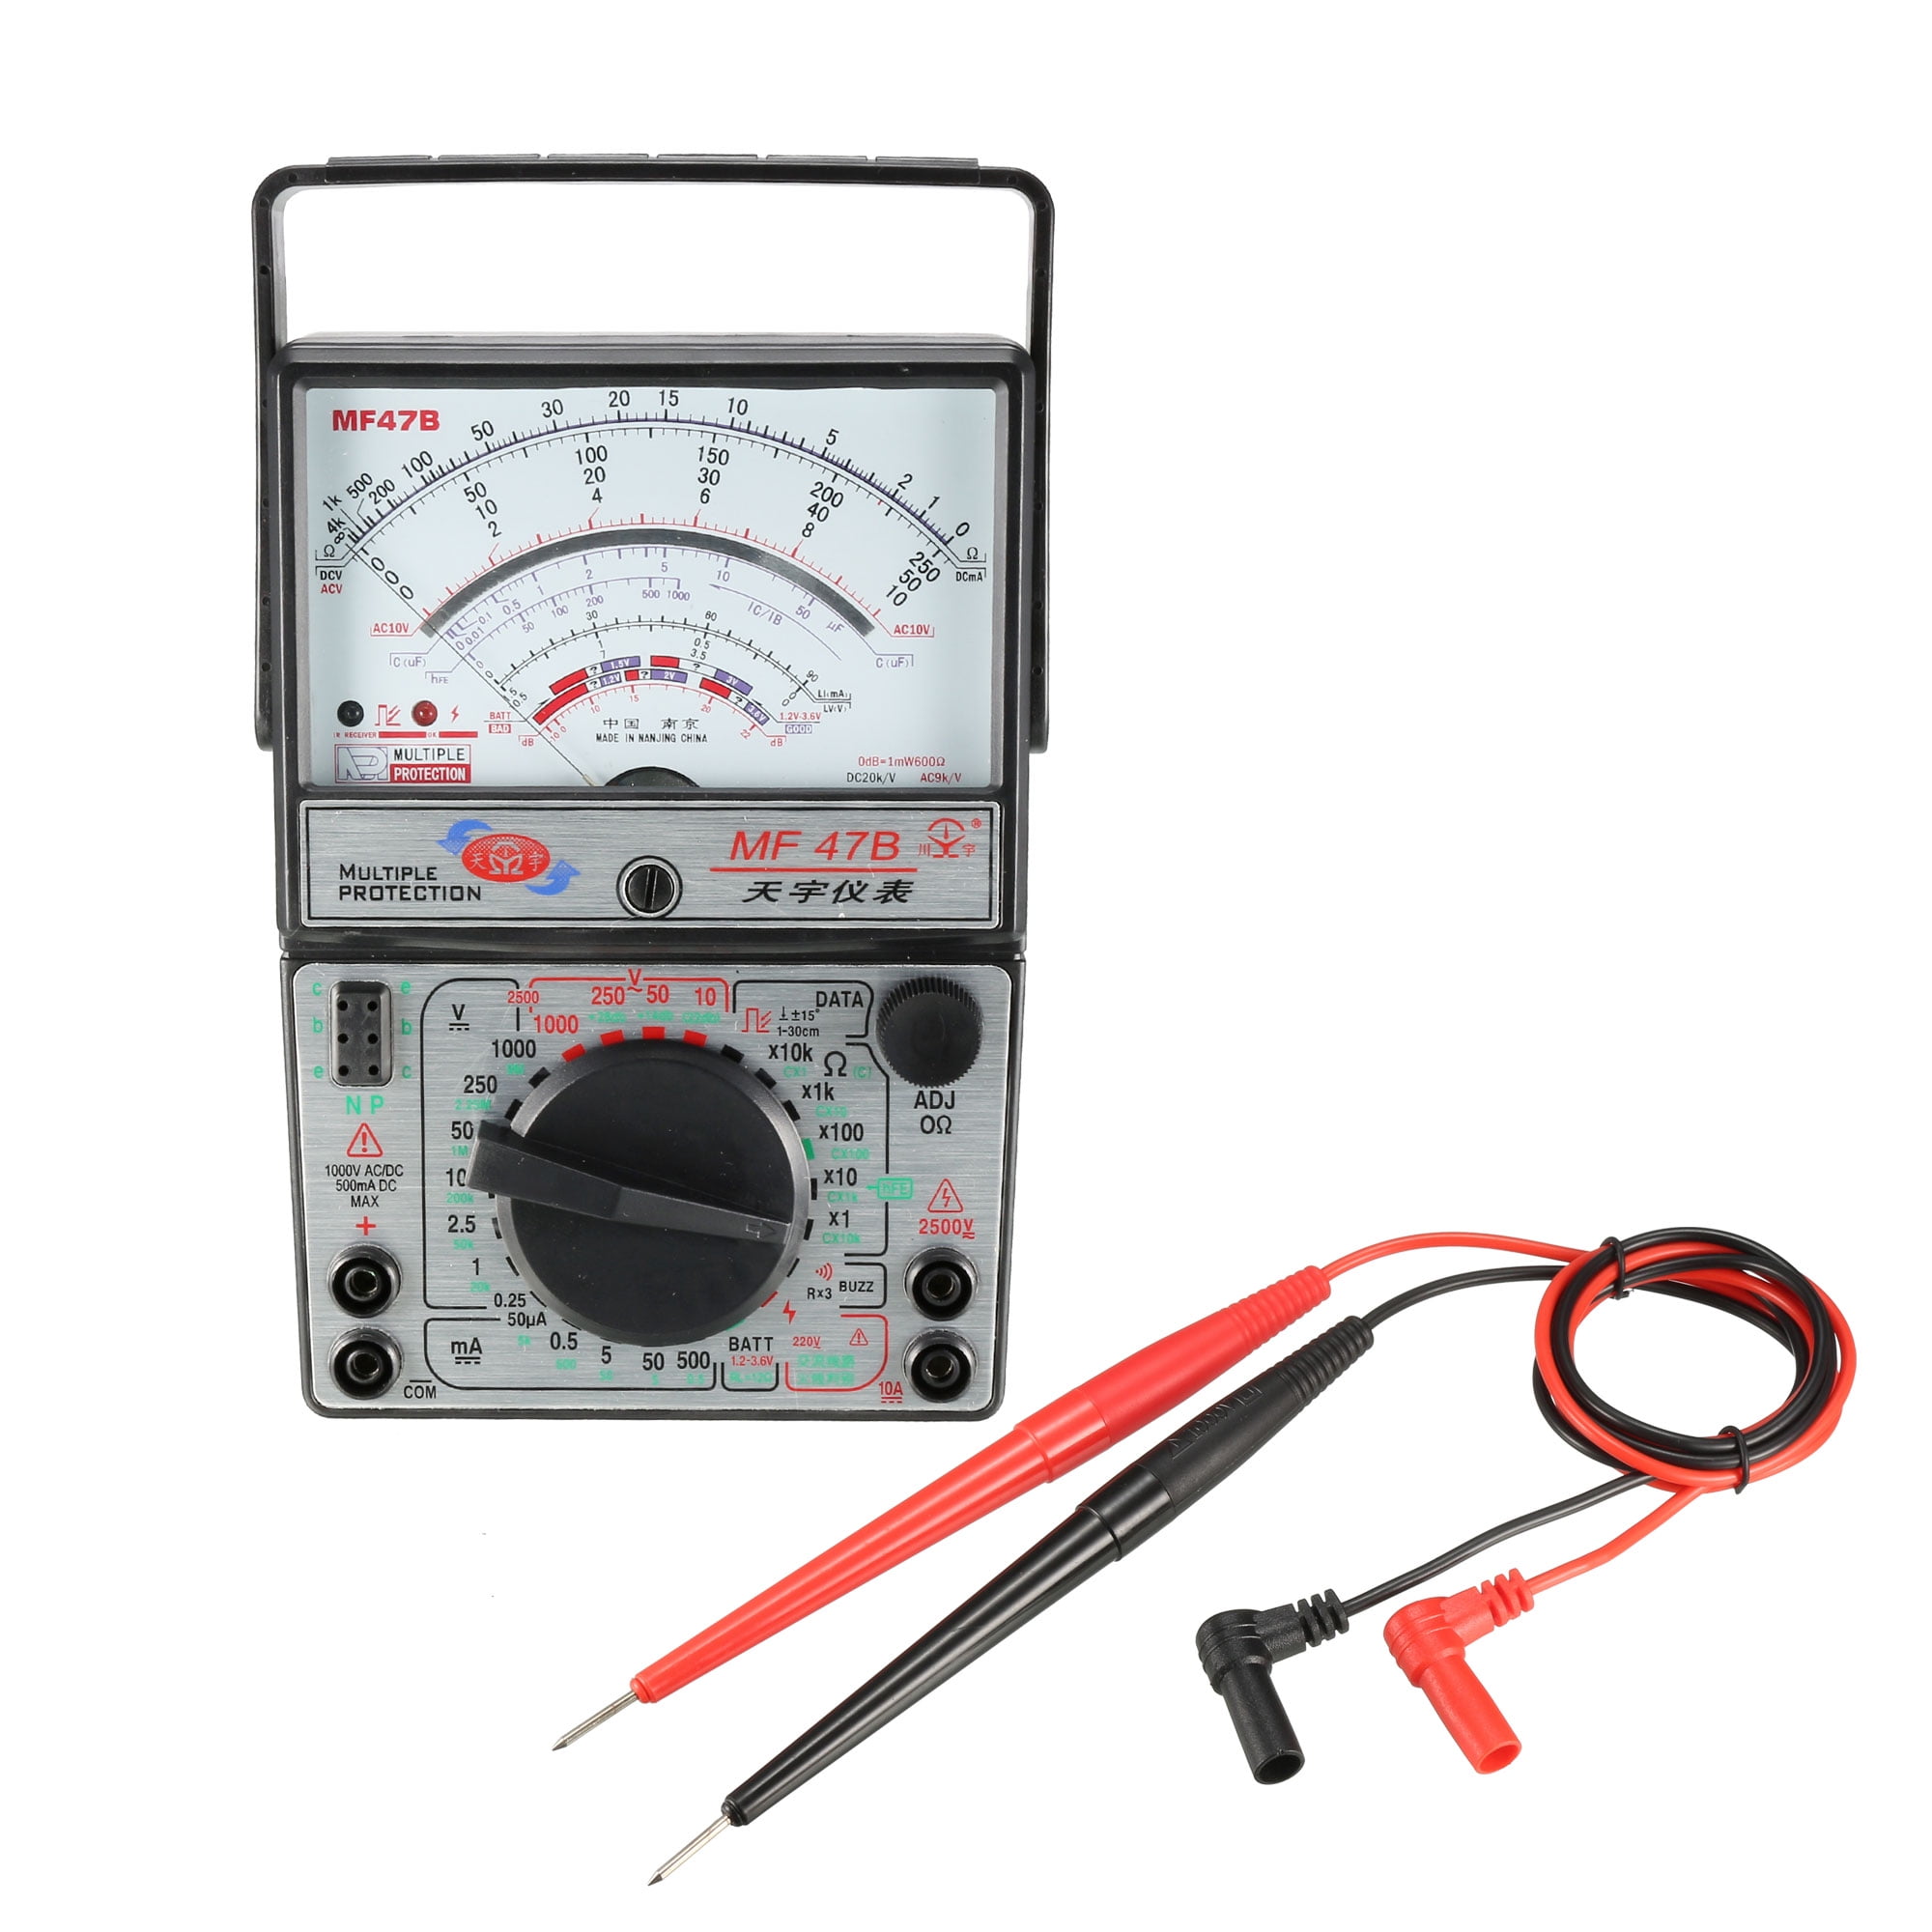 Details about   Analogue Meter Multimeter Multitester Fuse Diode Protection DC & AC AAA Battery 